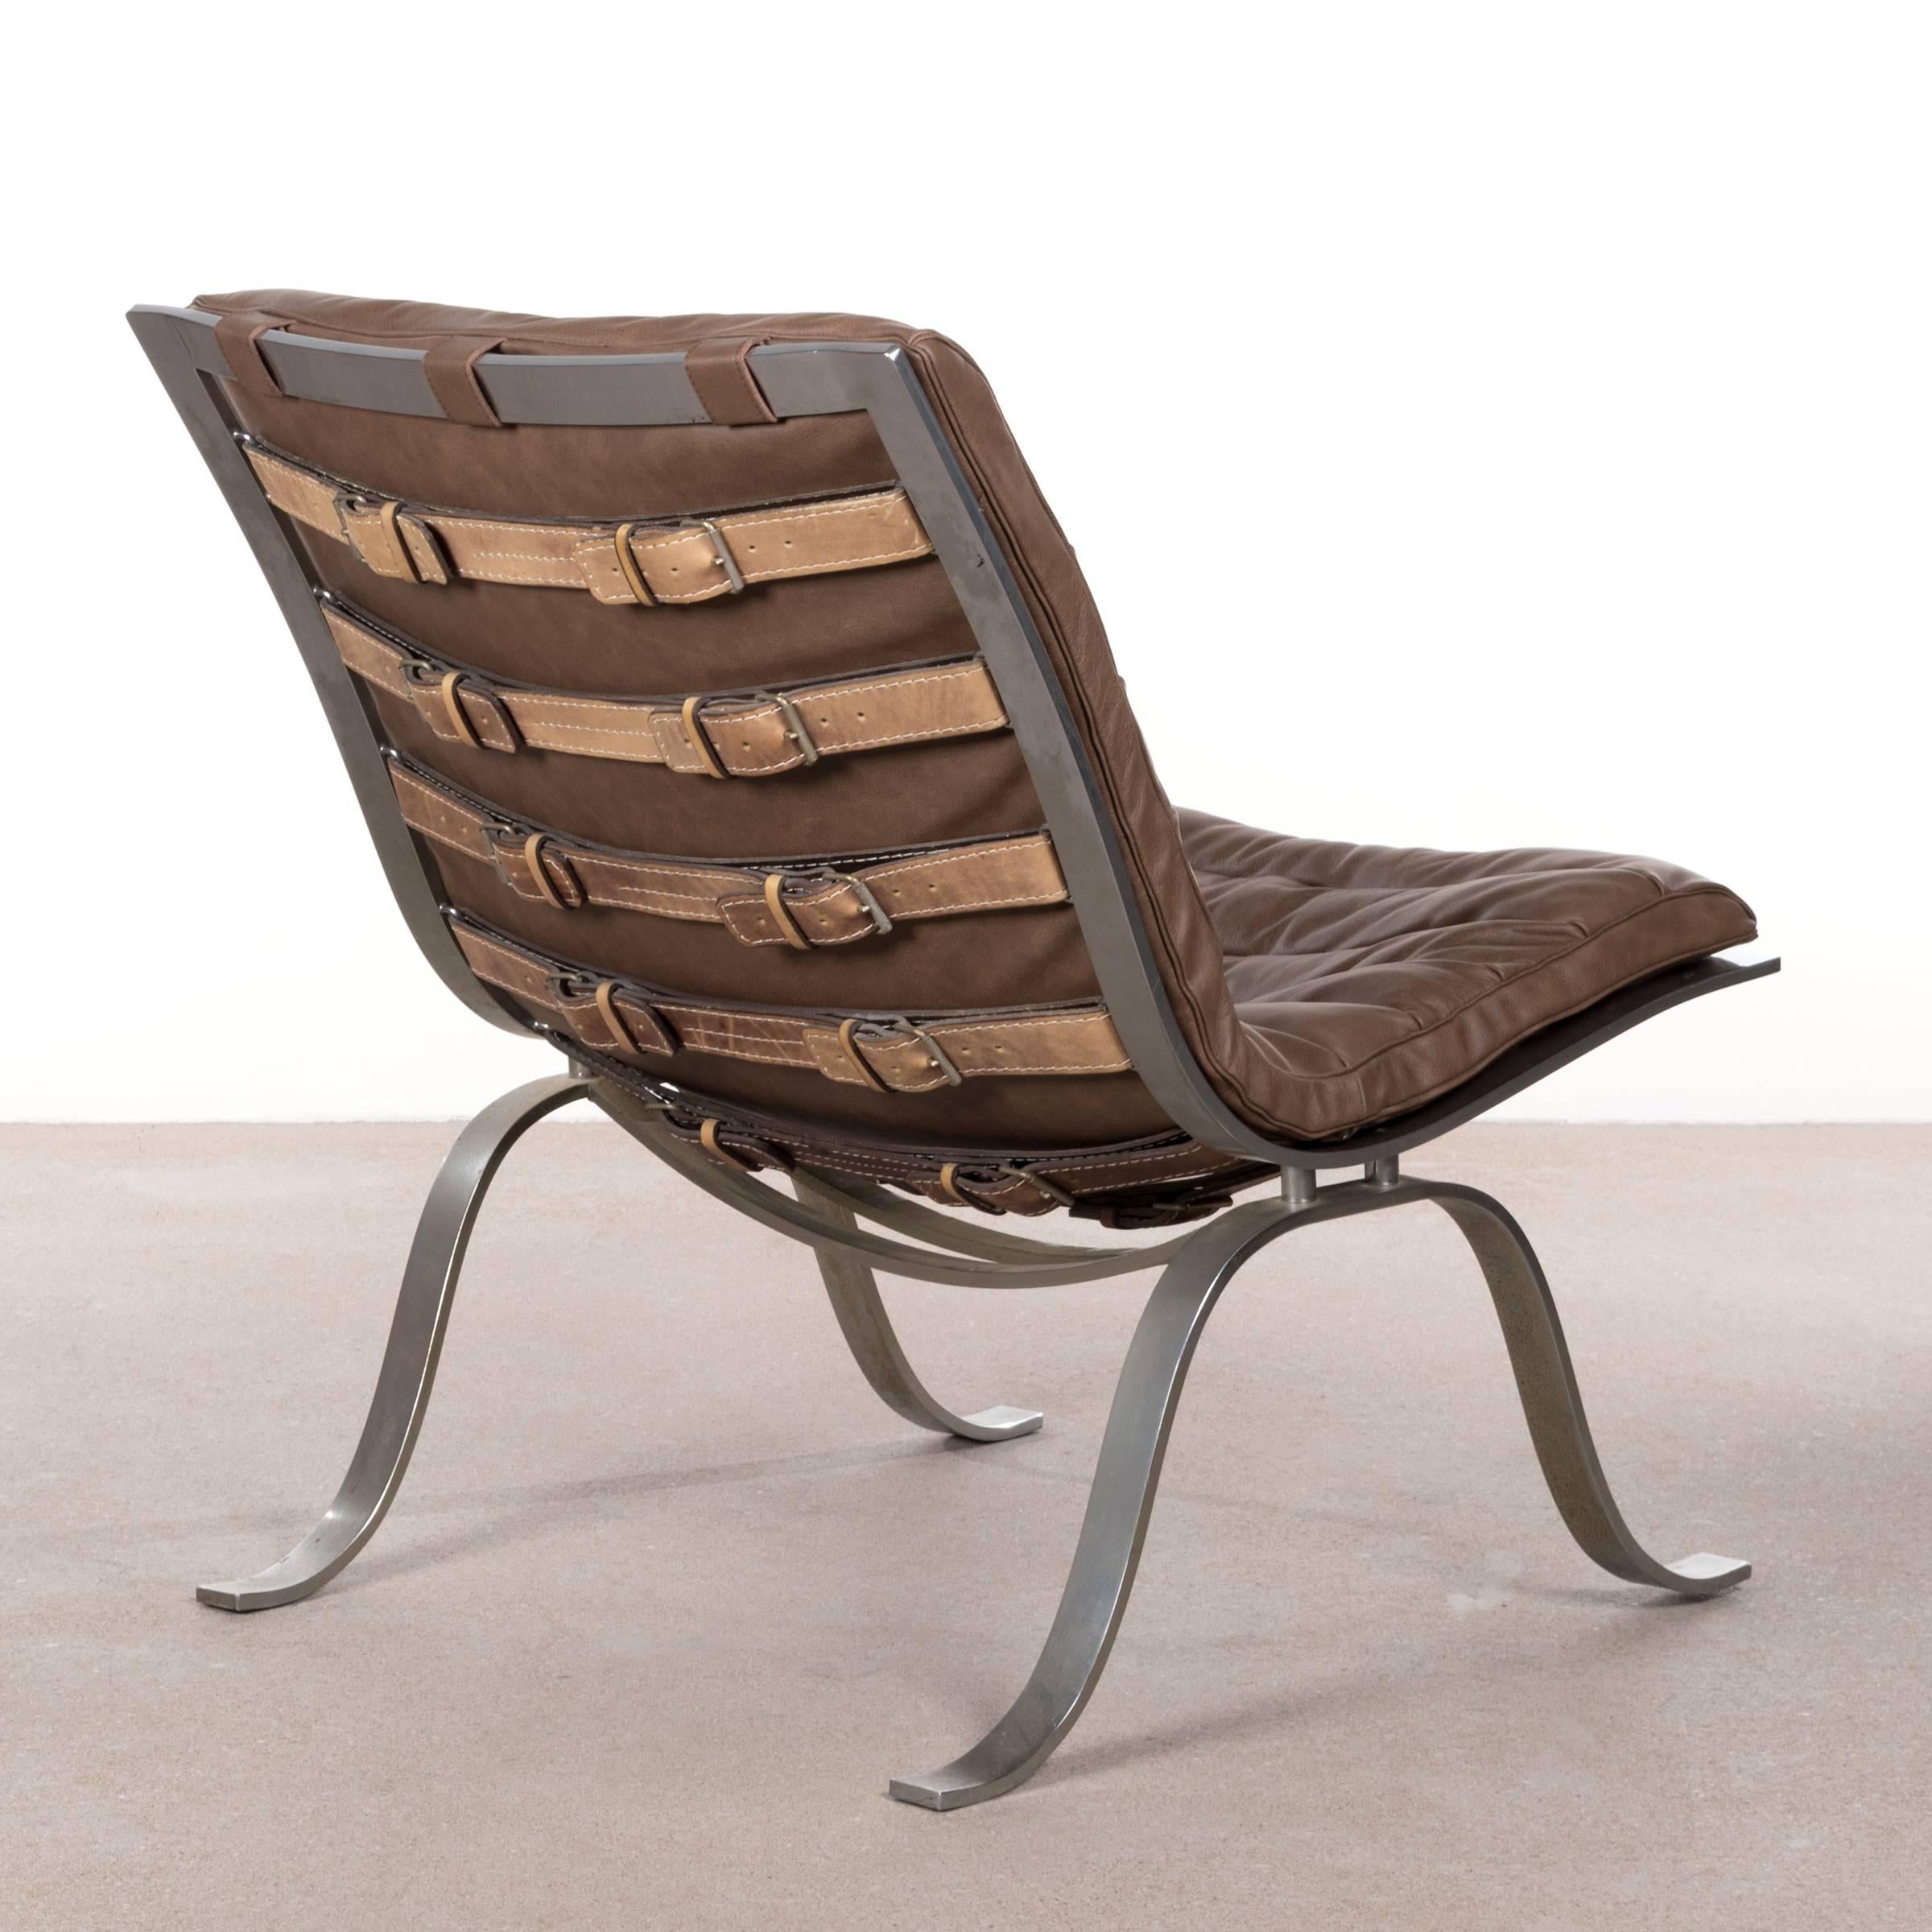 Beautiful lounge chair by Arne Norell. Newly upholstered in brown leather (excellent condition) with polished steel frame. Signed with manufacturer label.
The Ariet lounge chair is a smaller version of the more frequently seen Ari lounge chair and